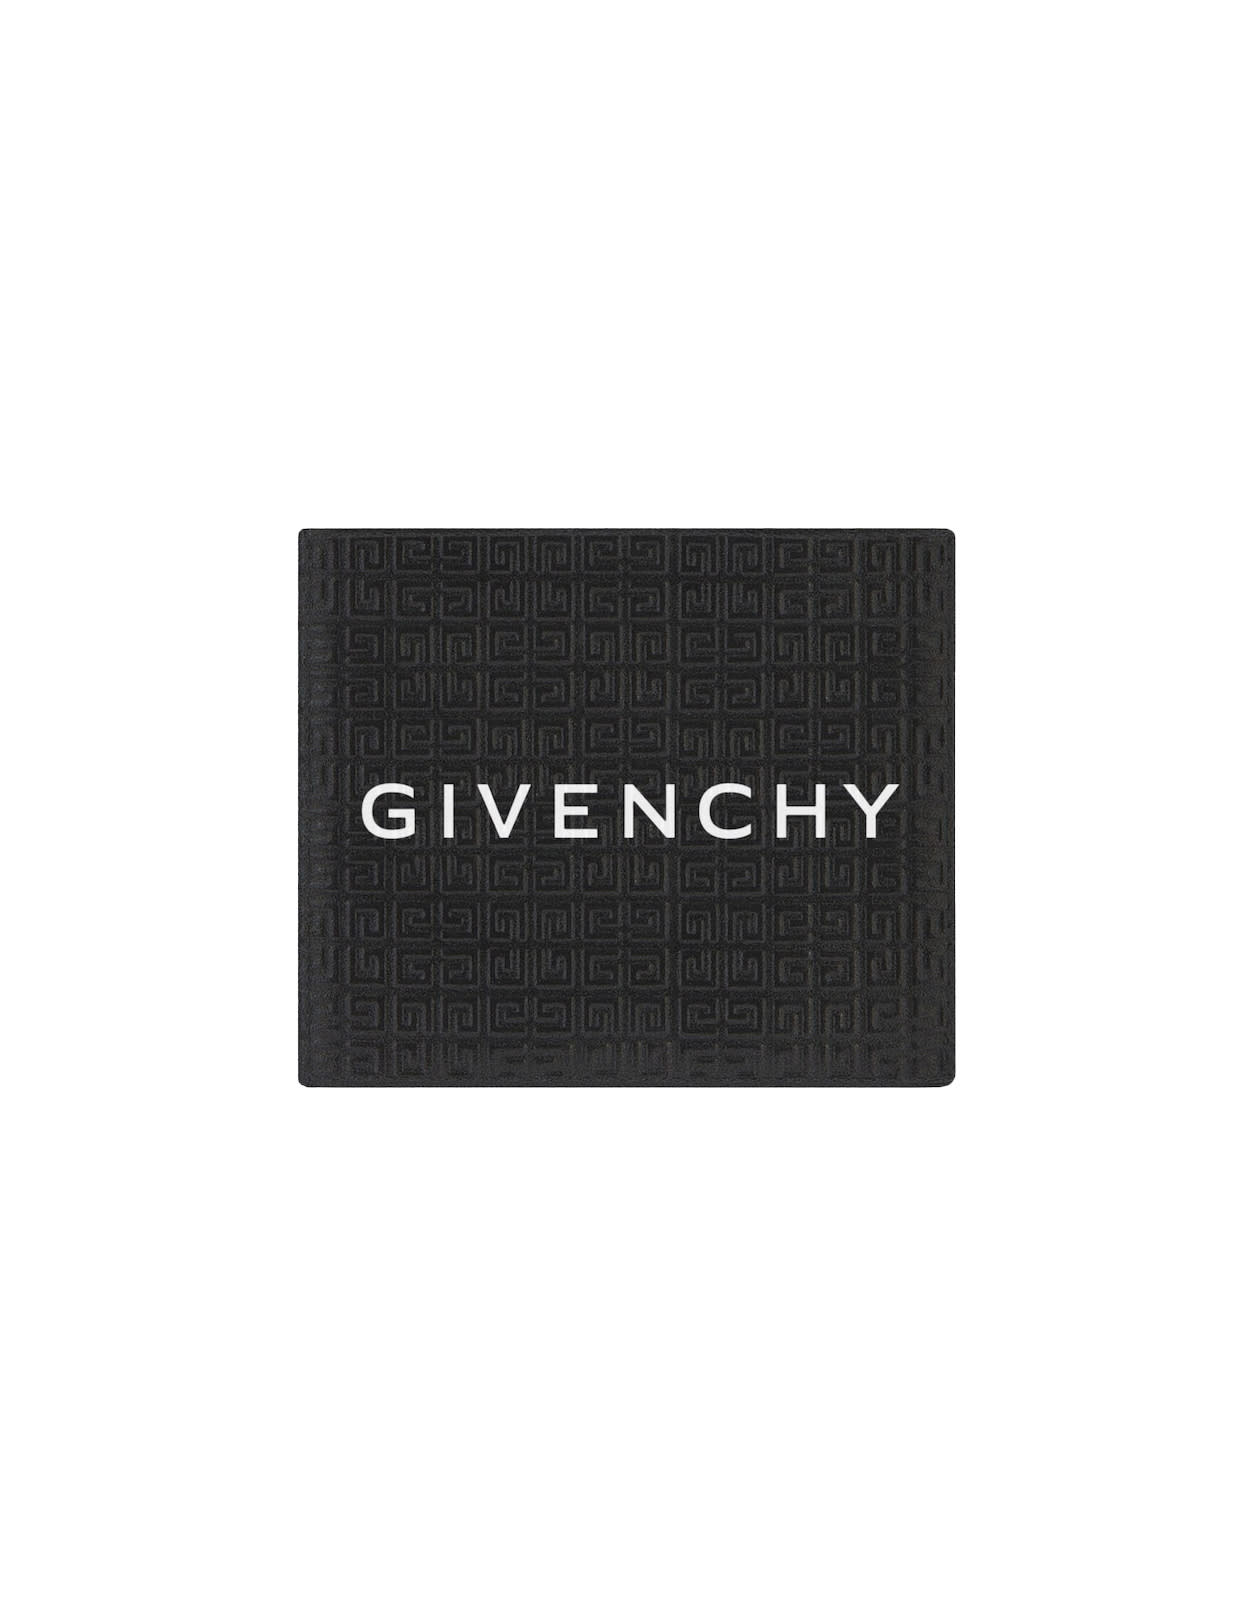 GIVENCHY GIVENCHY WALLET IN BLACK 4G LEATHER